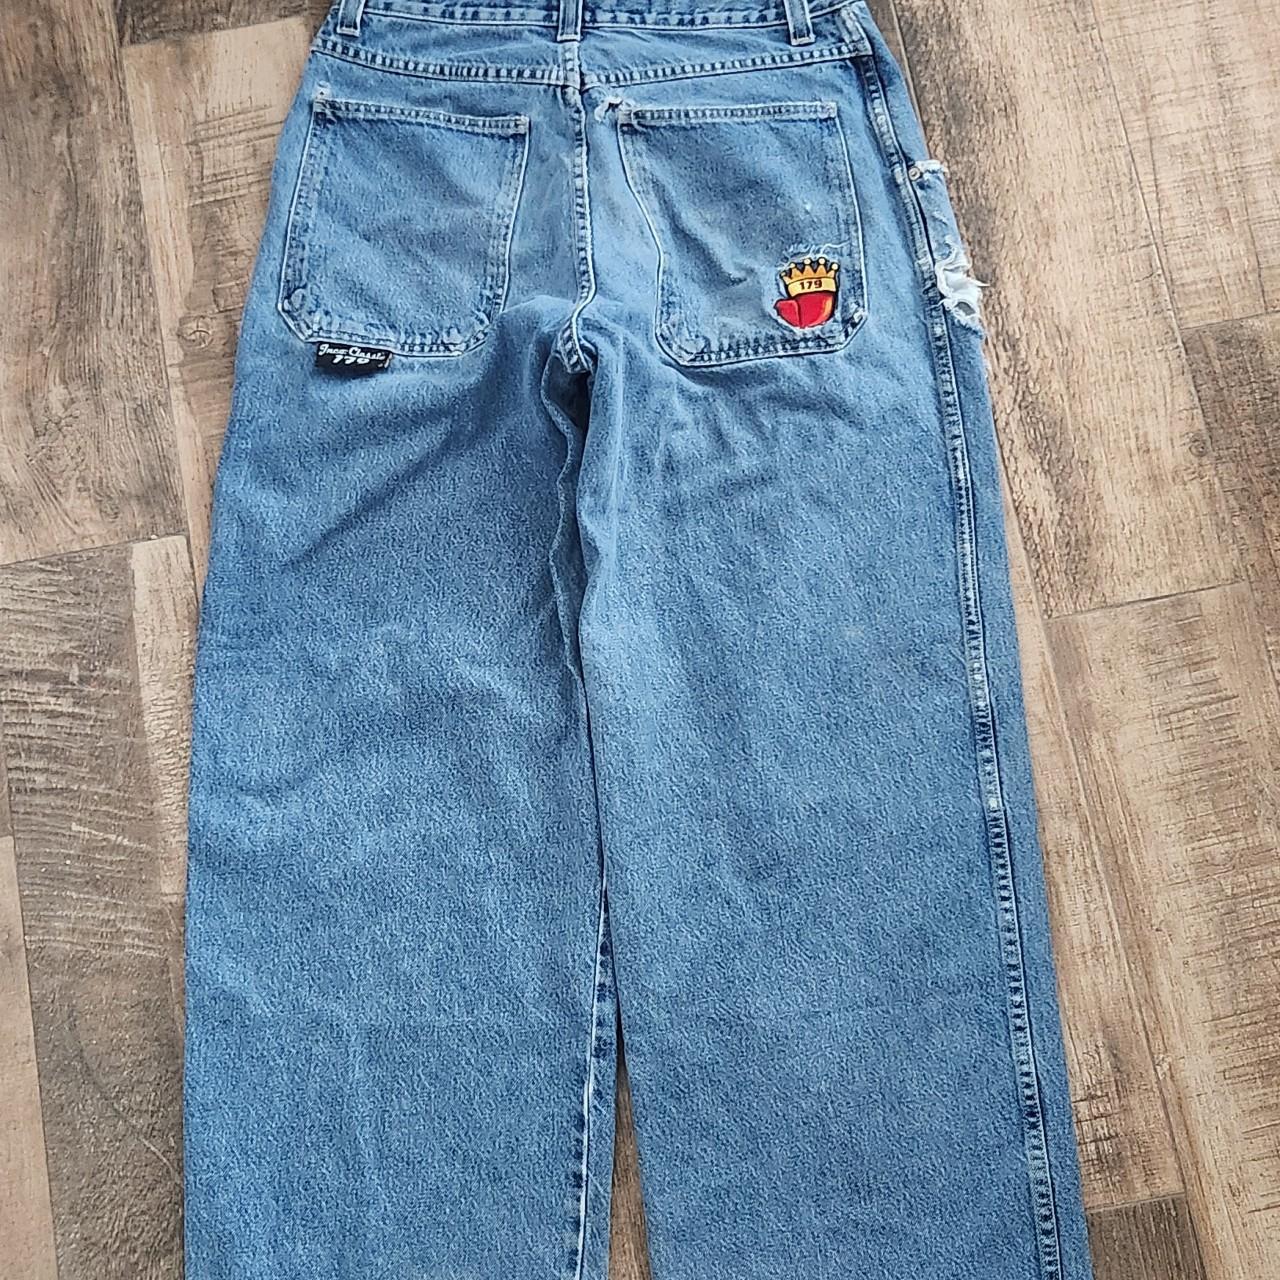 Vintage JNCO Classic 179 Pipes 34/32 looking for... - Depop